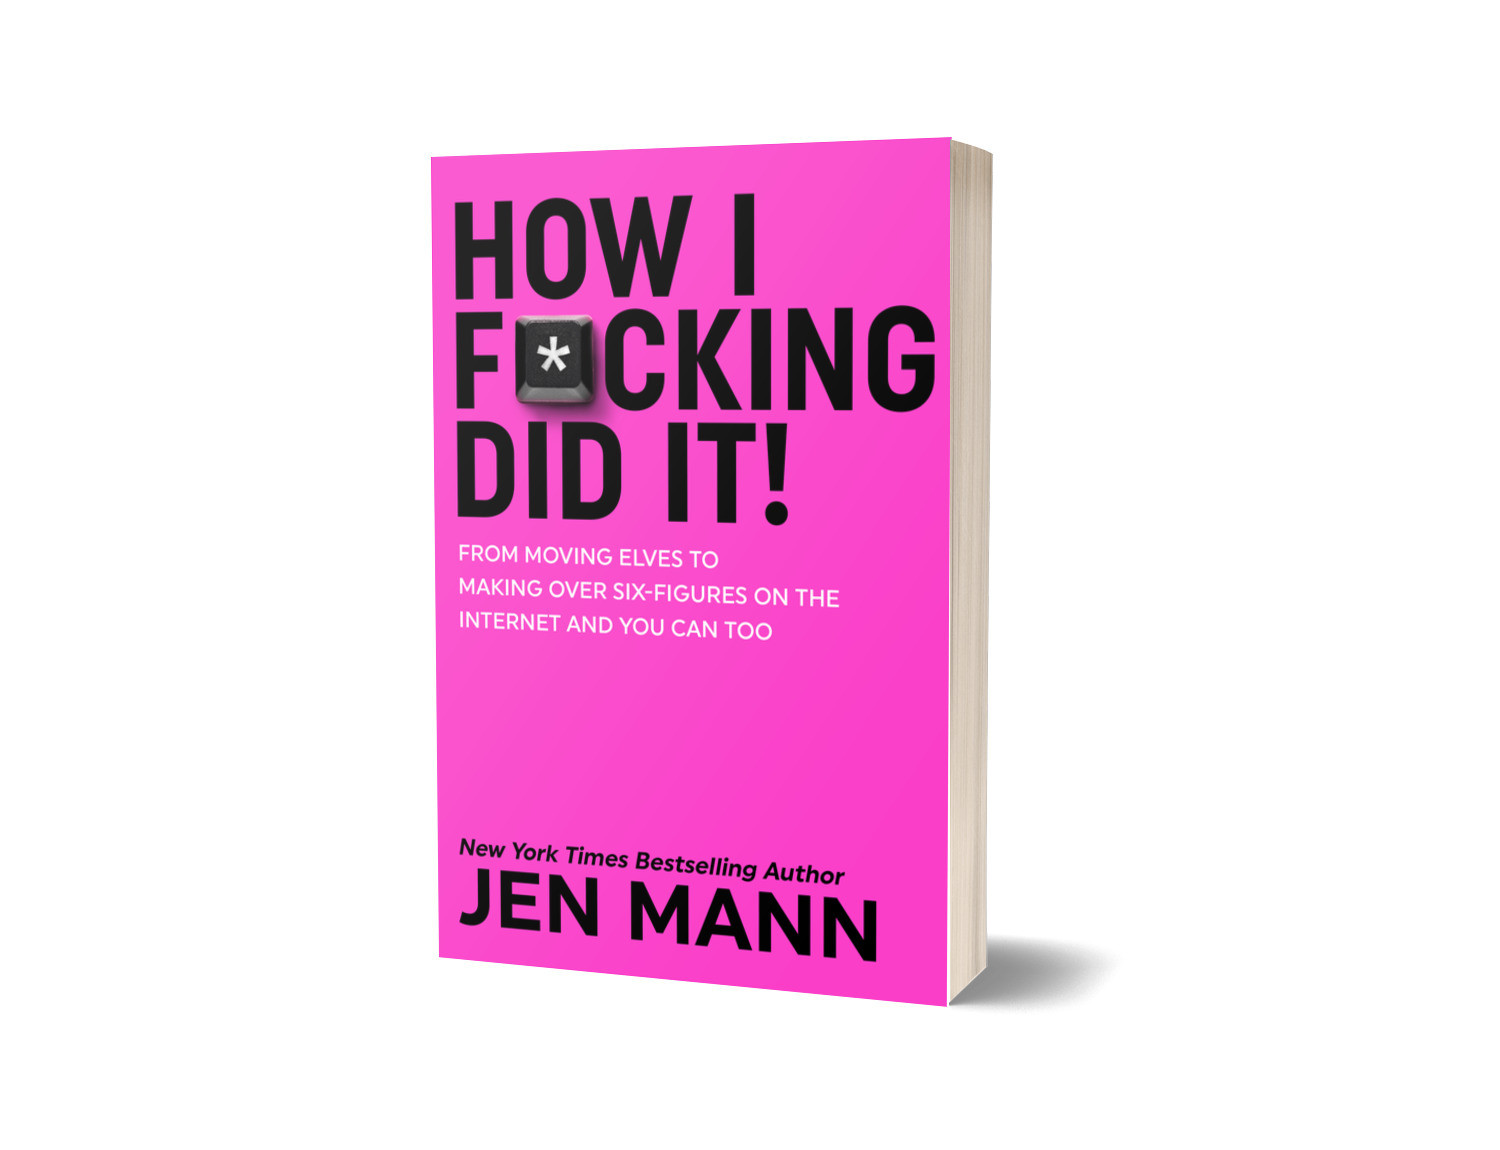 How I F*cking Did It!: From Moving Elves to Making Over Six-Figures on the Internet and You Can Too! - Signed Copy